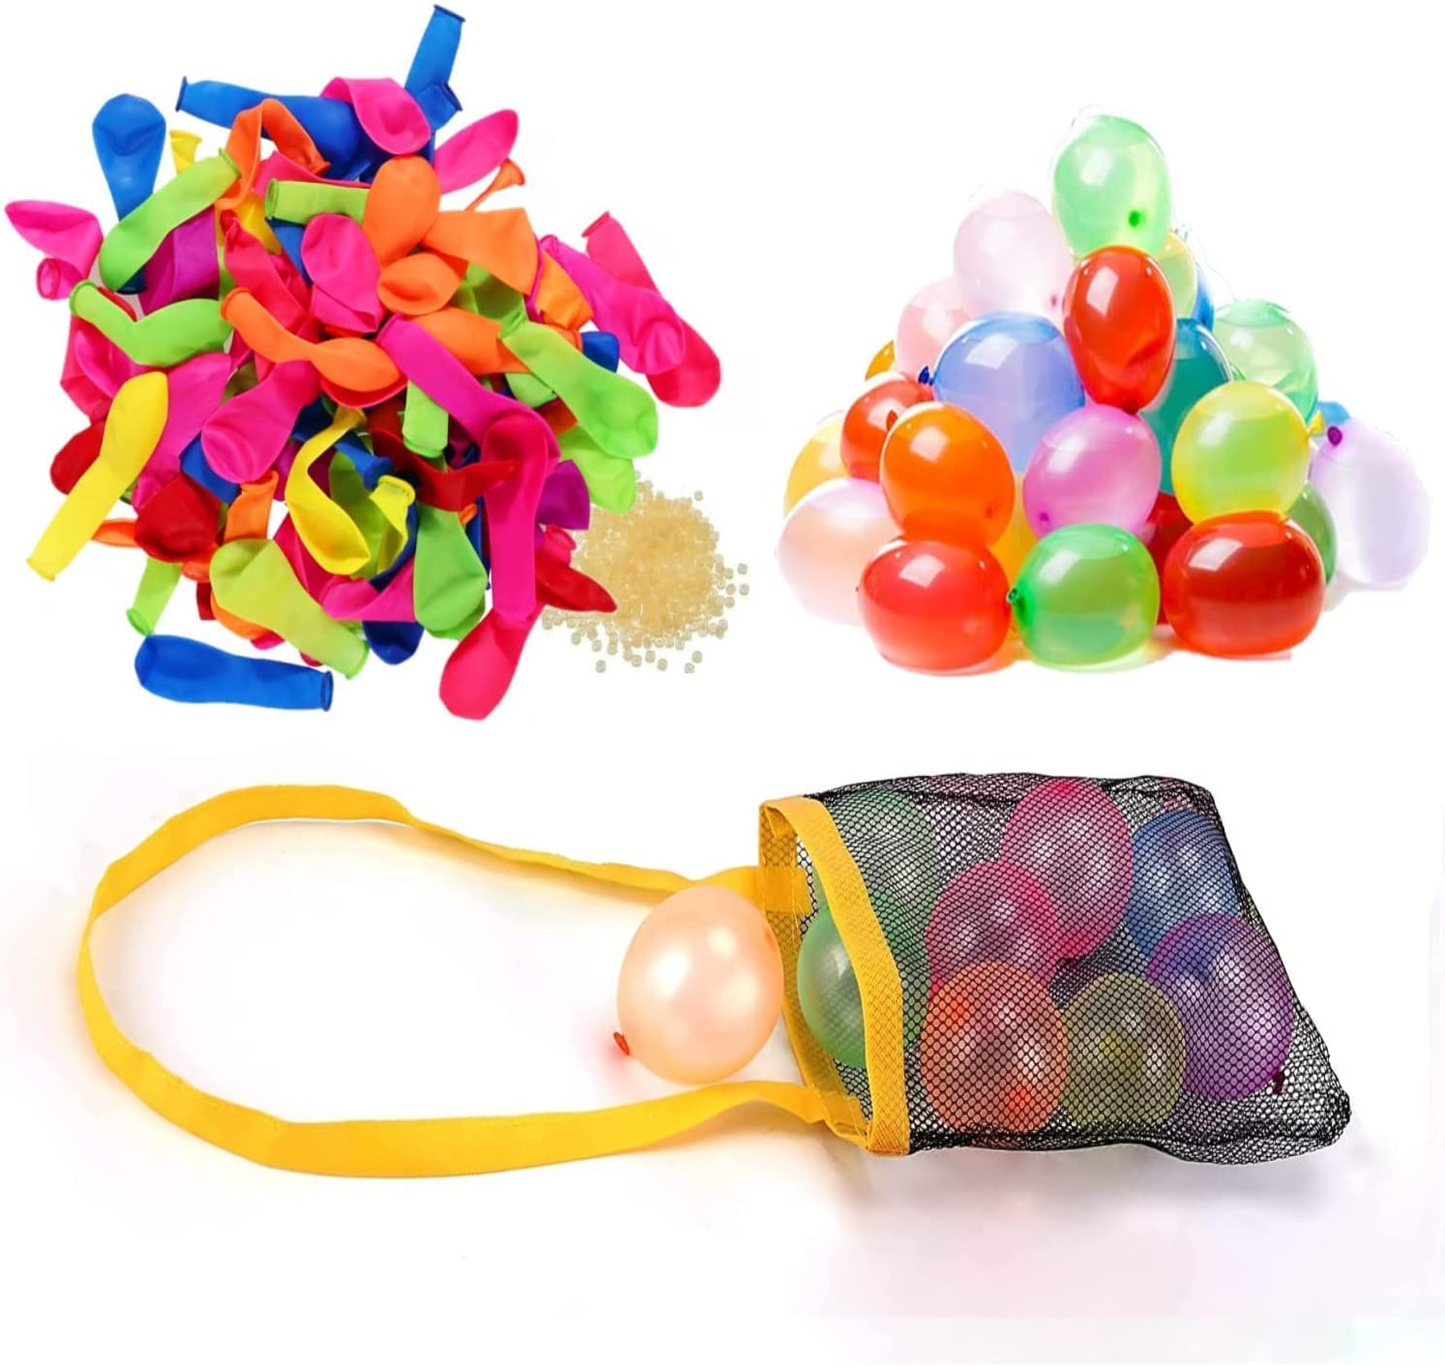 Water Balloons for Kids Boys & Girls Adults, 290 Balloon Total with Refill Hose Nozzle for Outdoor Summer Fun Swimming Pool Splash Party Backyard Water Toy